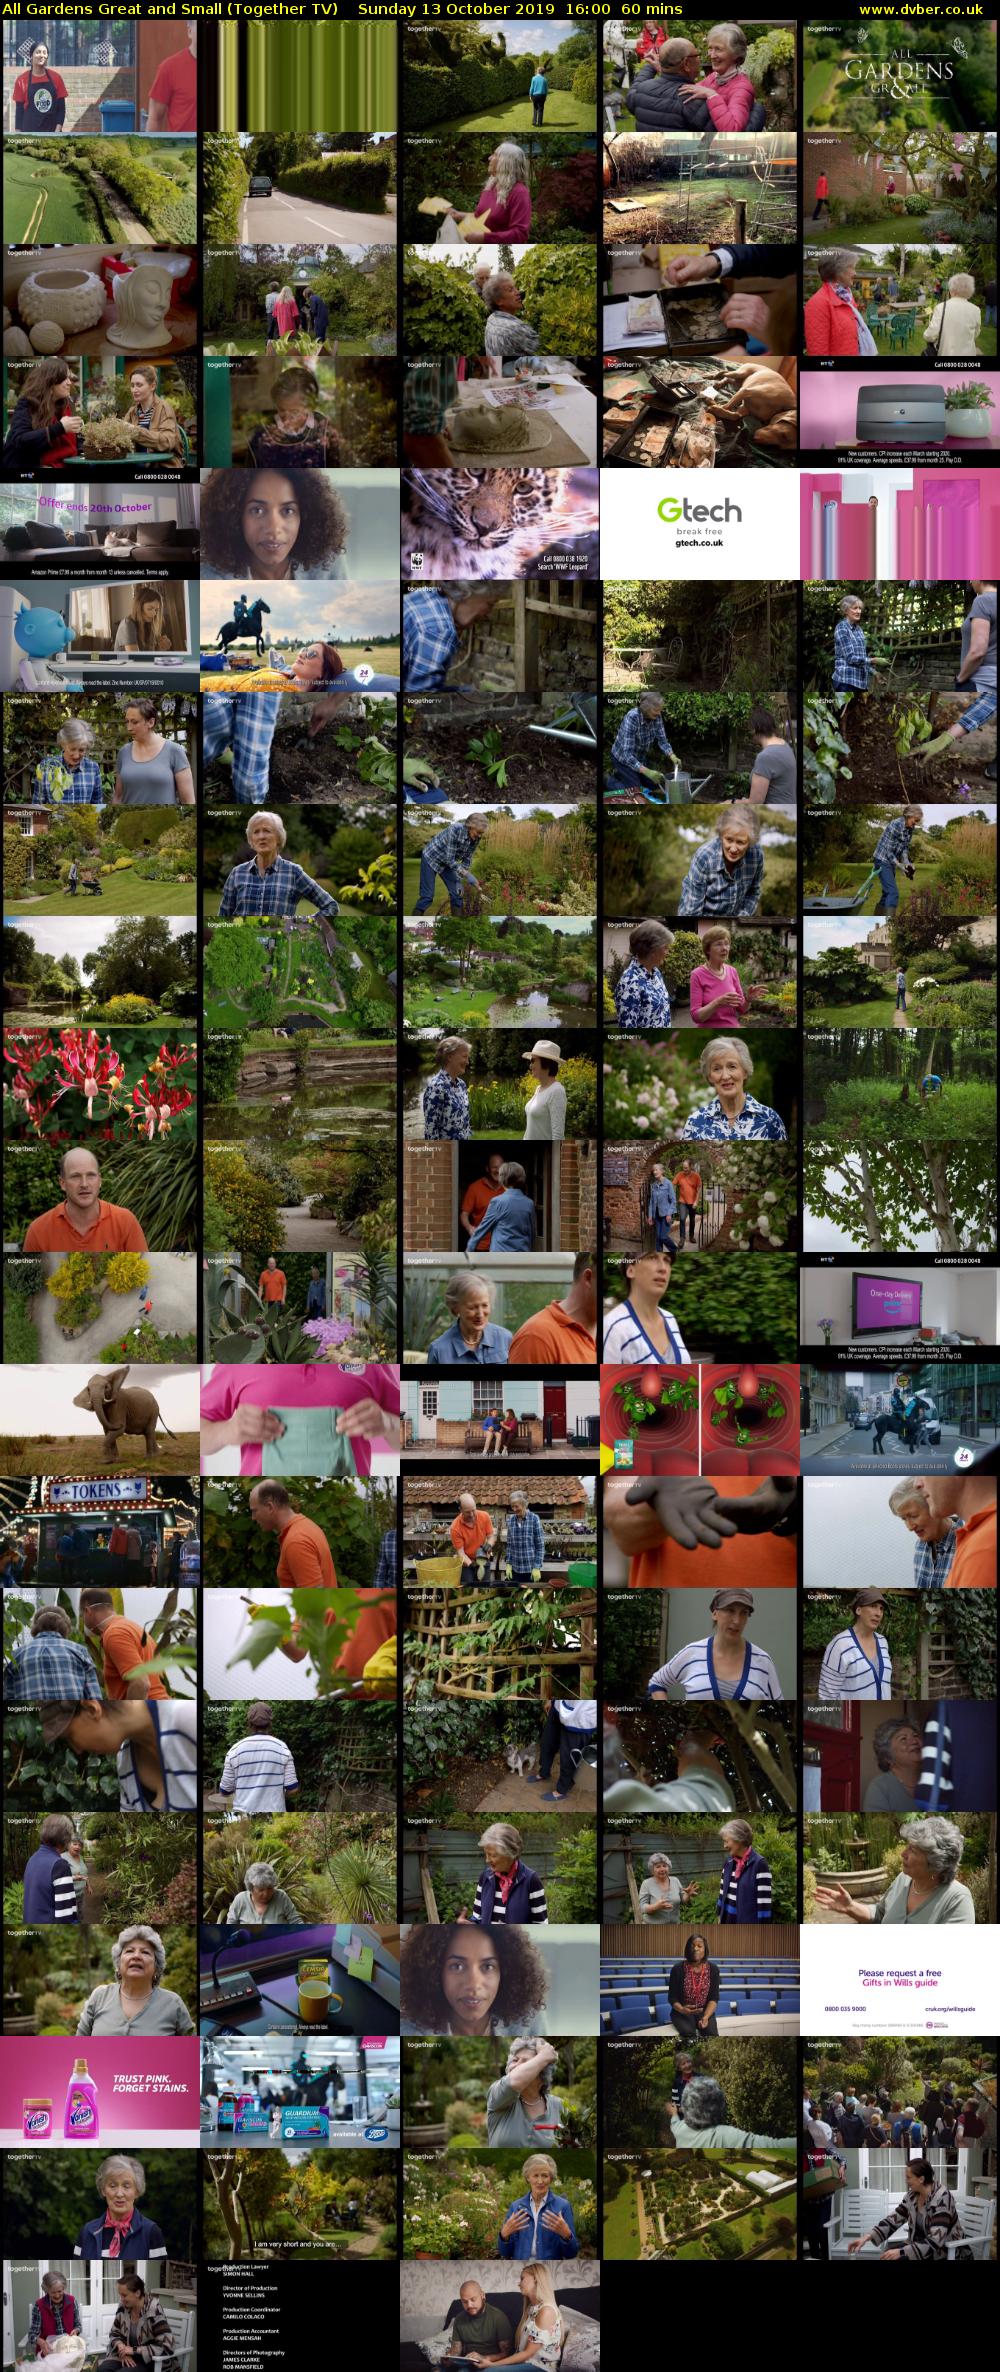 All Gardens Great and Small (Together TV) Sunday 13 October 2019 16:00 - 17:00